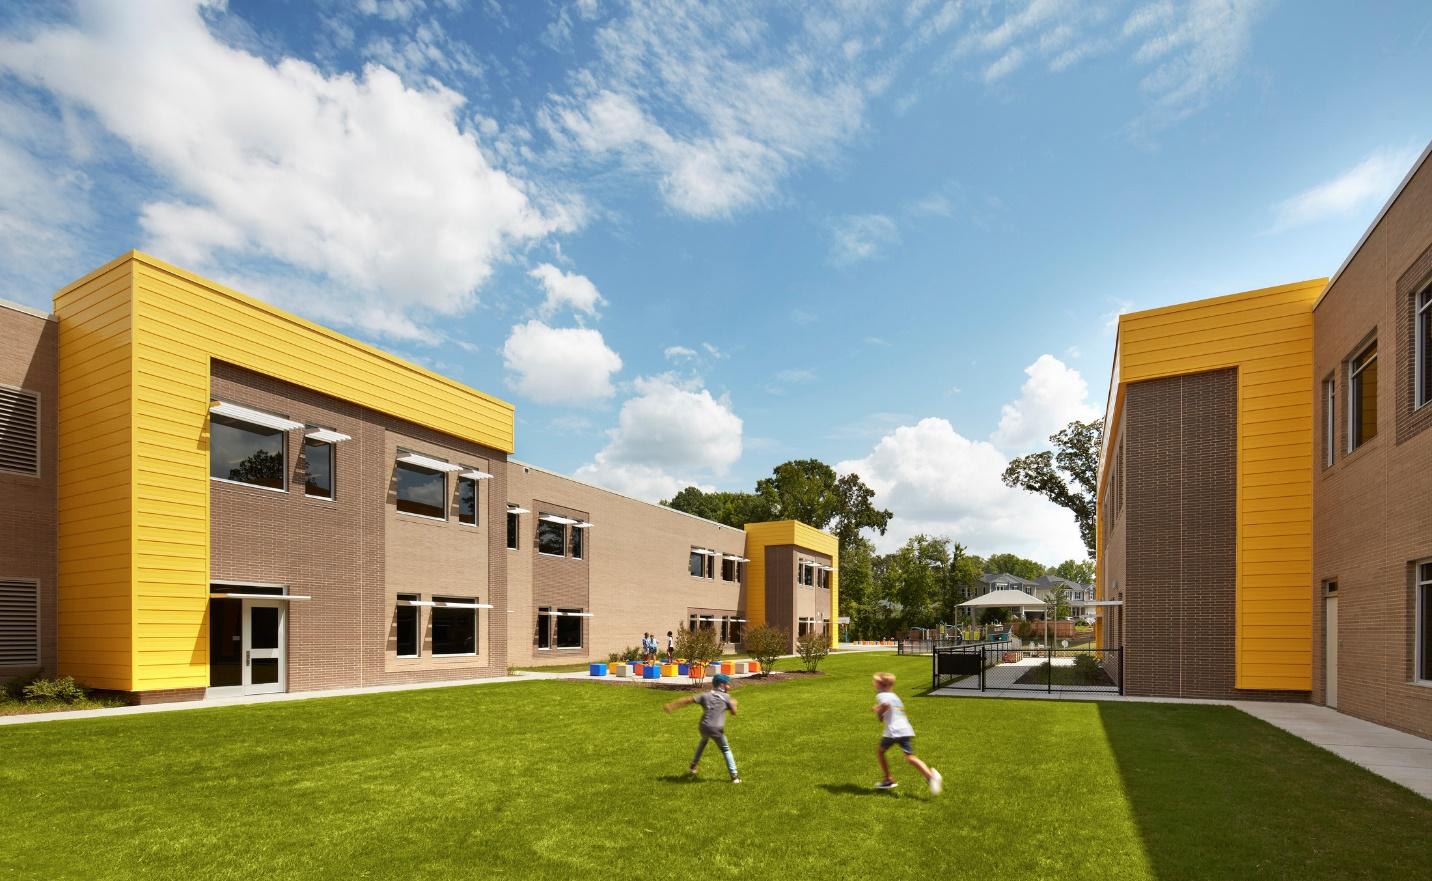 A picture containing grass, sky, building, outdoor with kids running around the school.